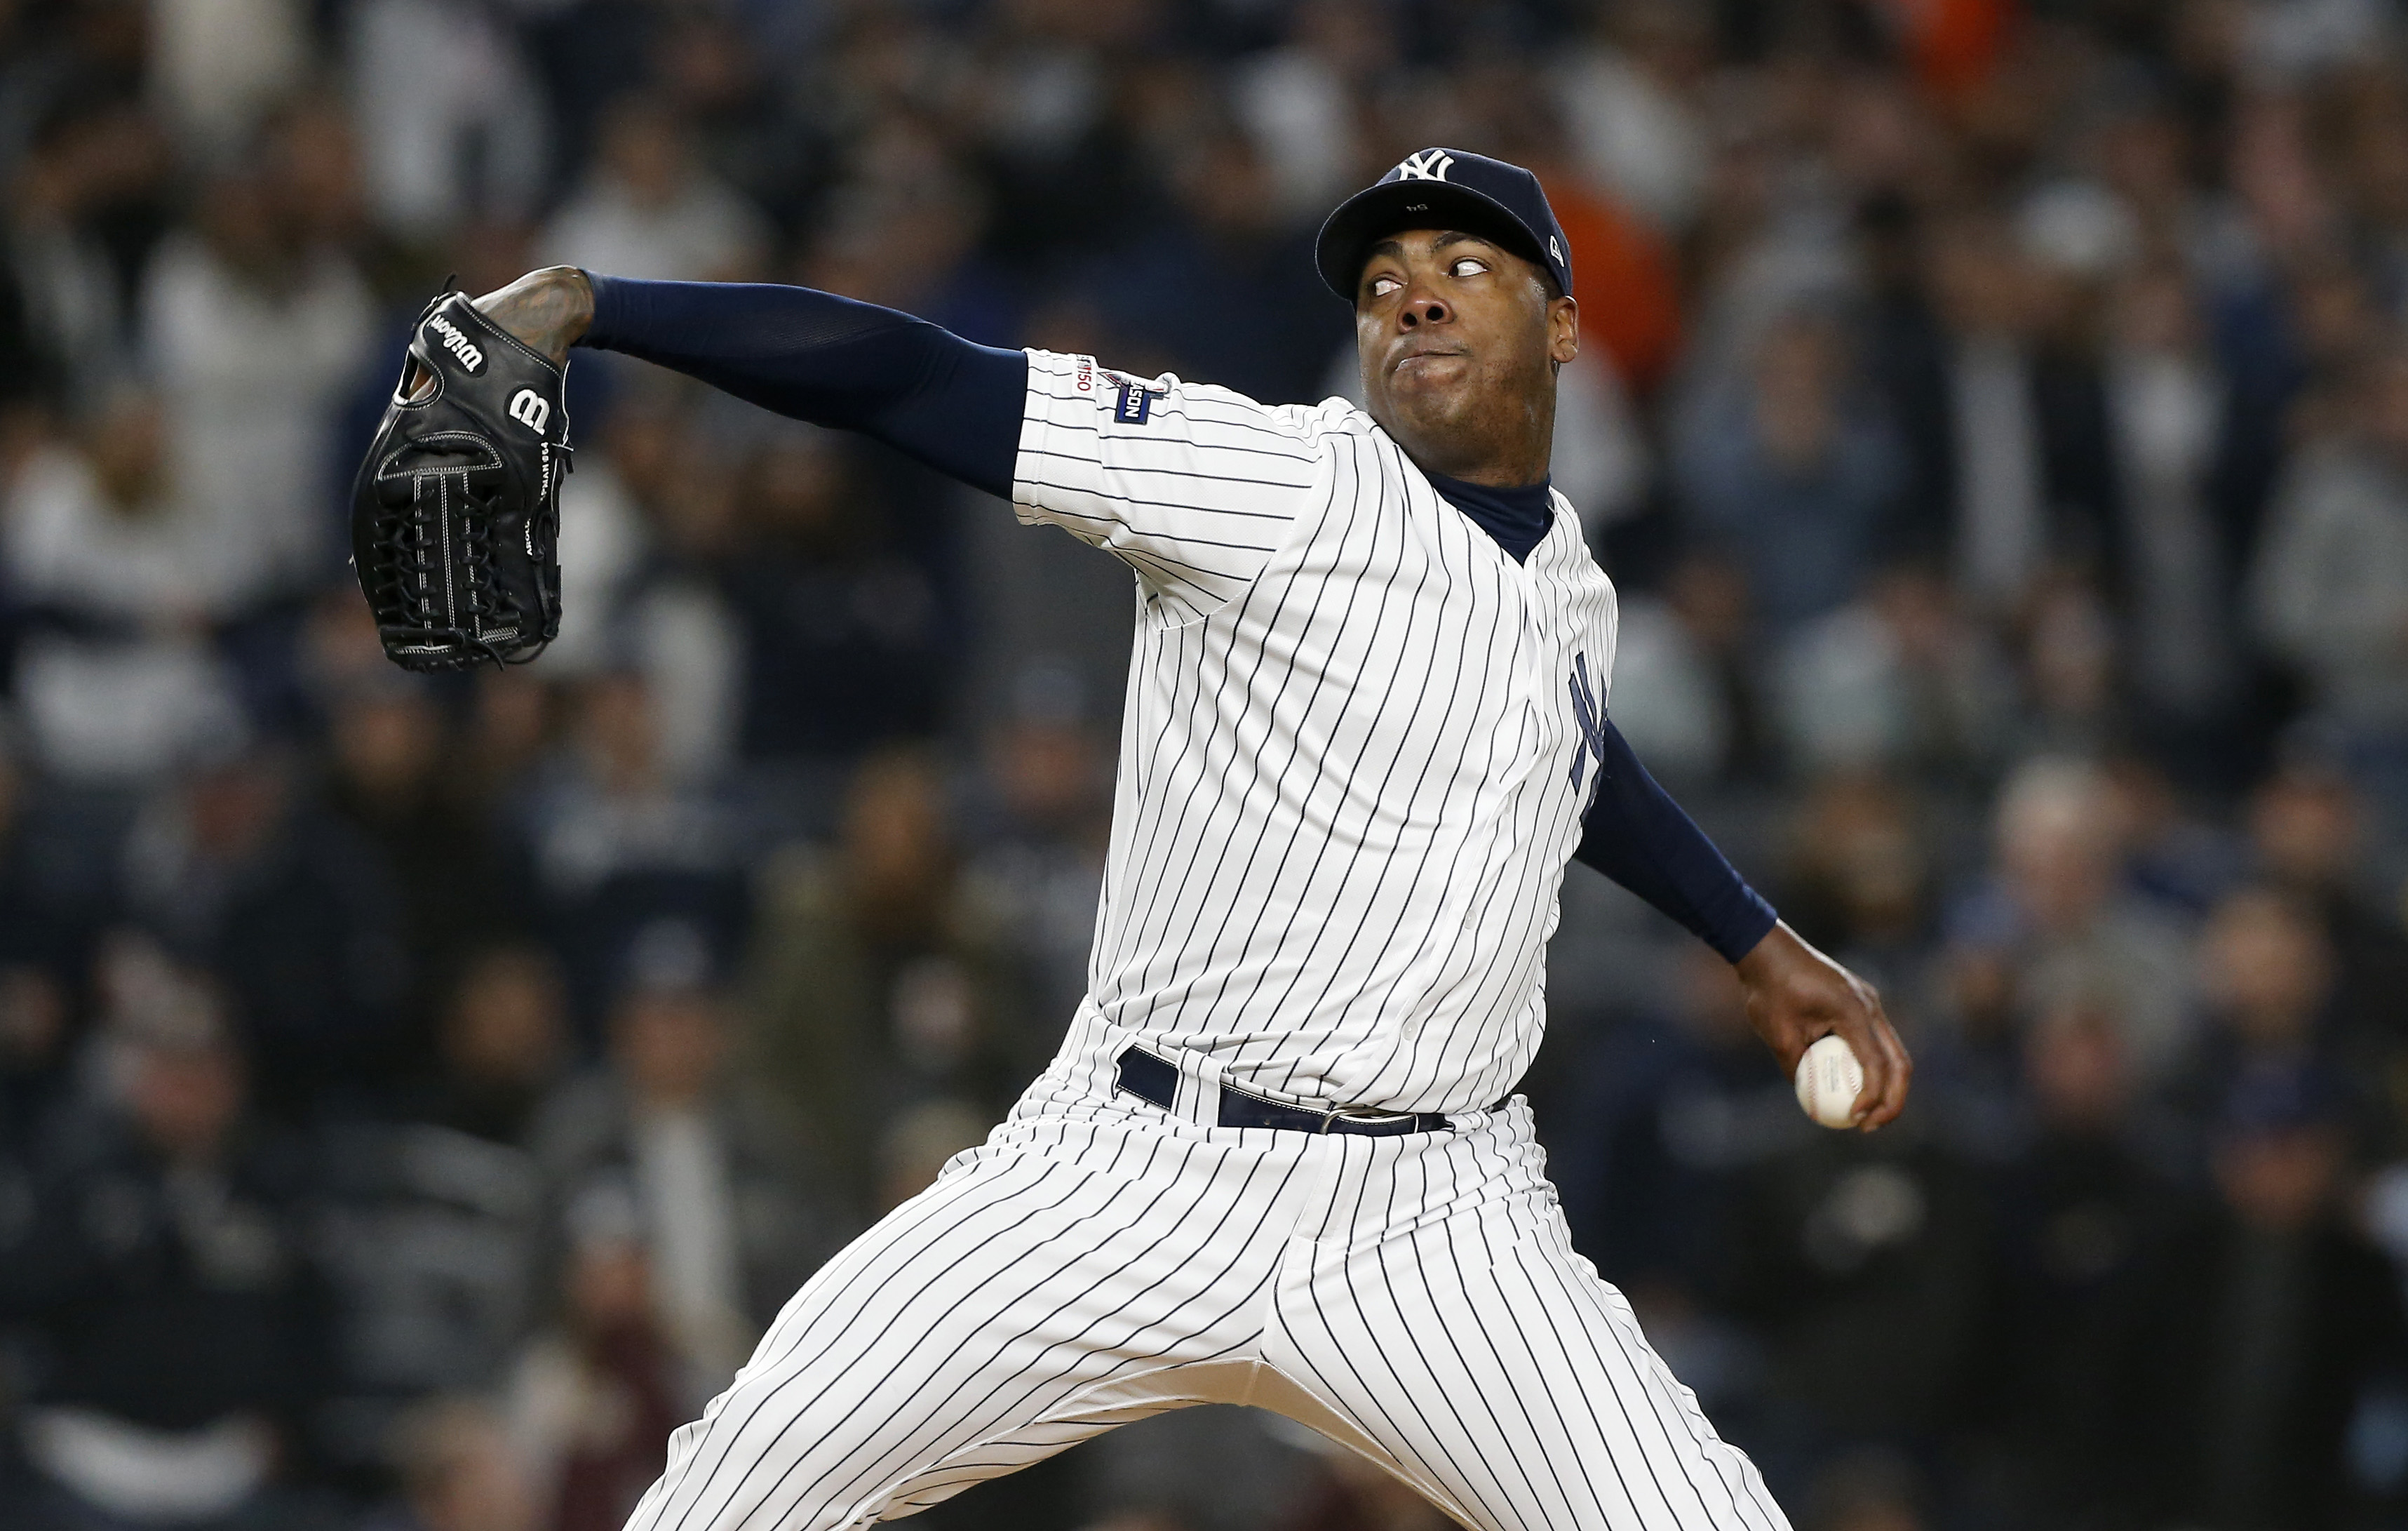 Yankees Pitcher Aroldis Chapman Worked as Cuban Government Informant Before Defecting